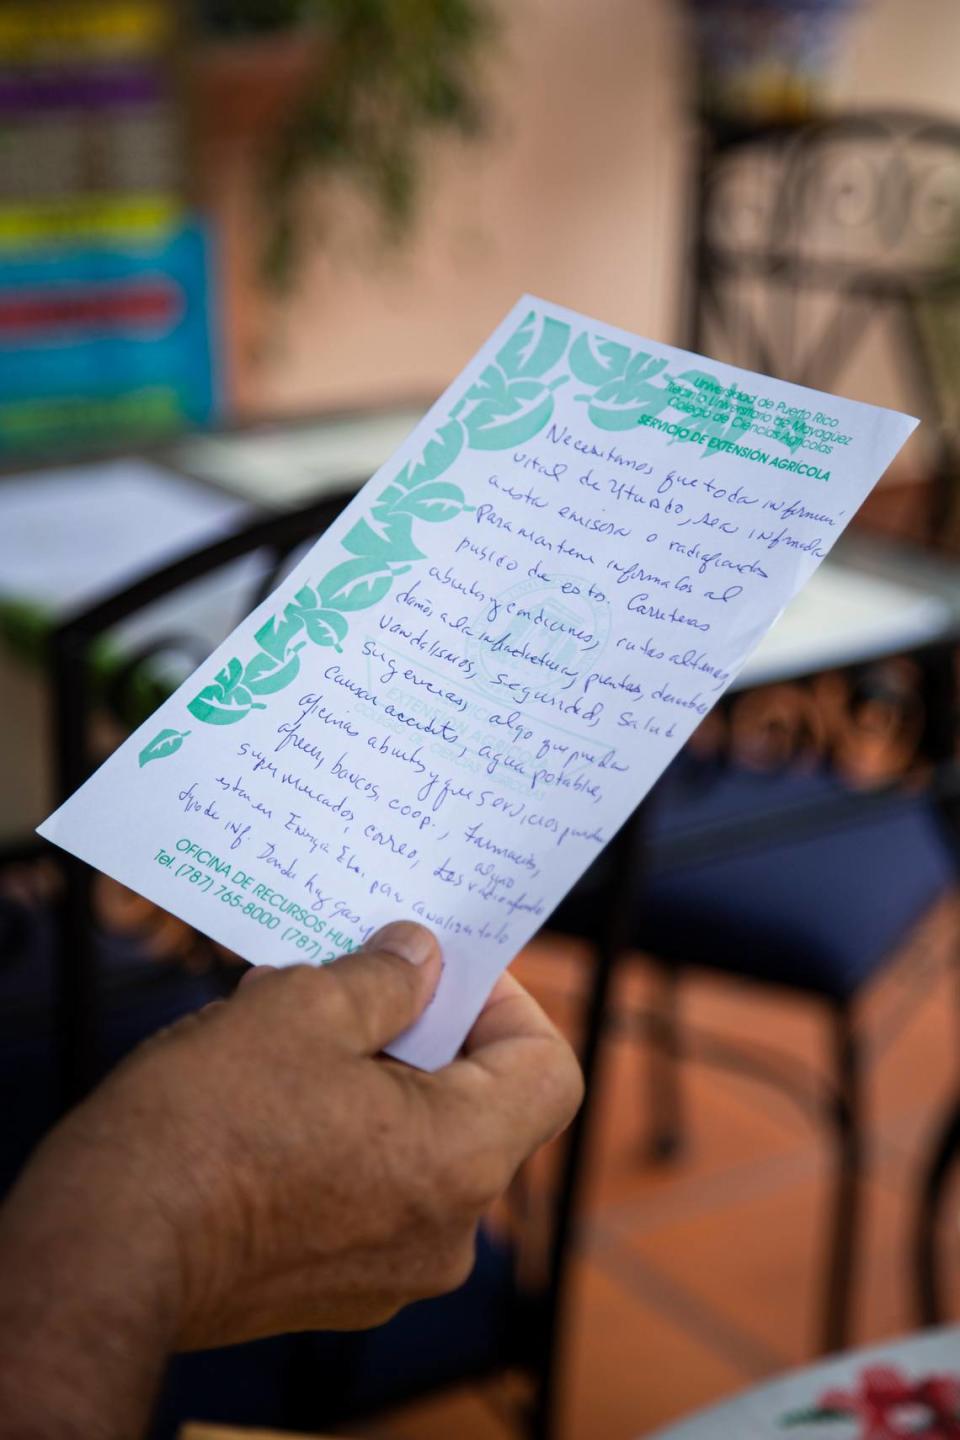 Pedro Labayen, founder of the Radio Amateur Association of Utuado, holds one of the messages he wrote and transmitted through a local radio station during Hurricane Maria.